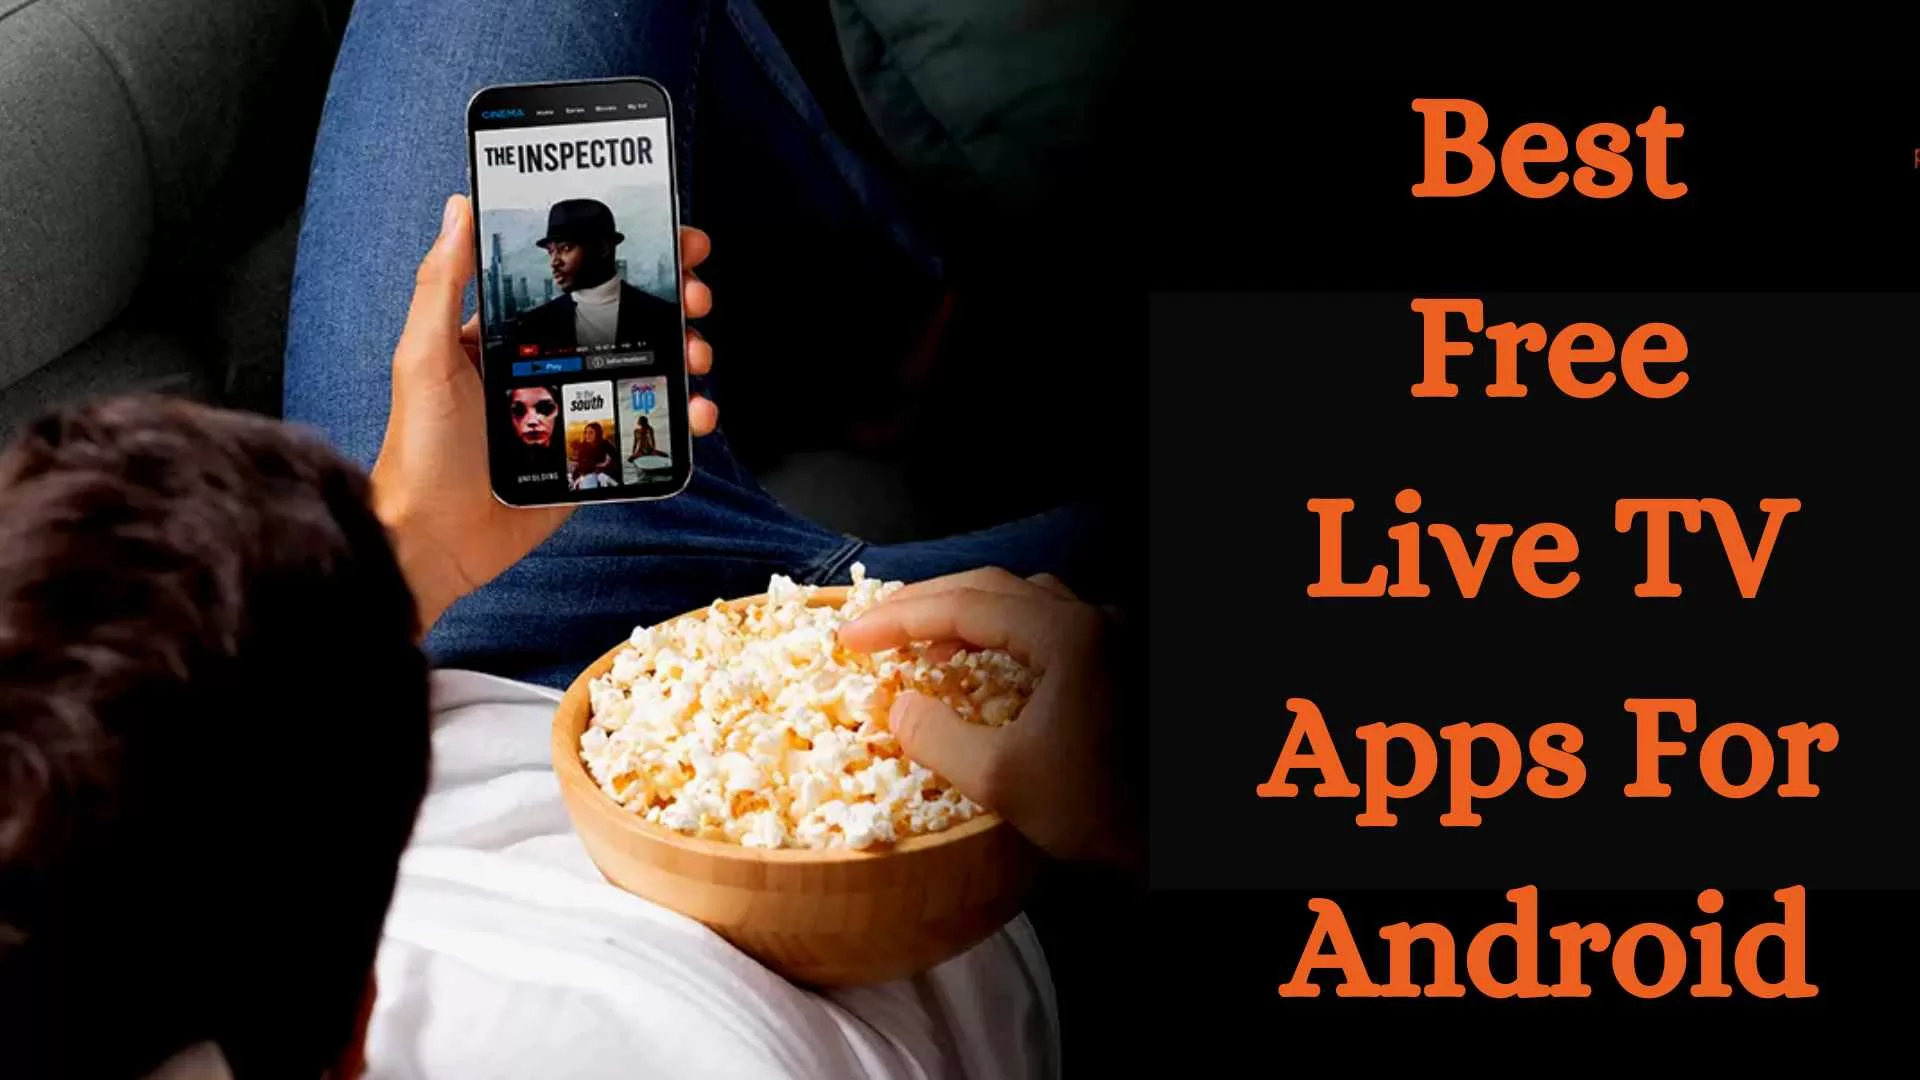 Best Free Live TV Apps For Android